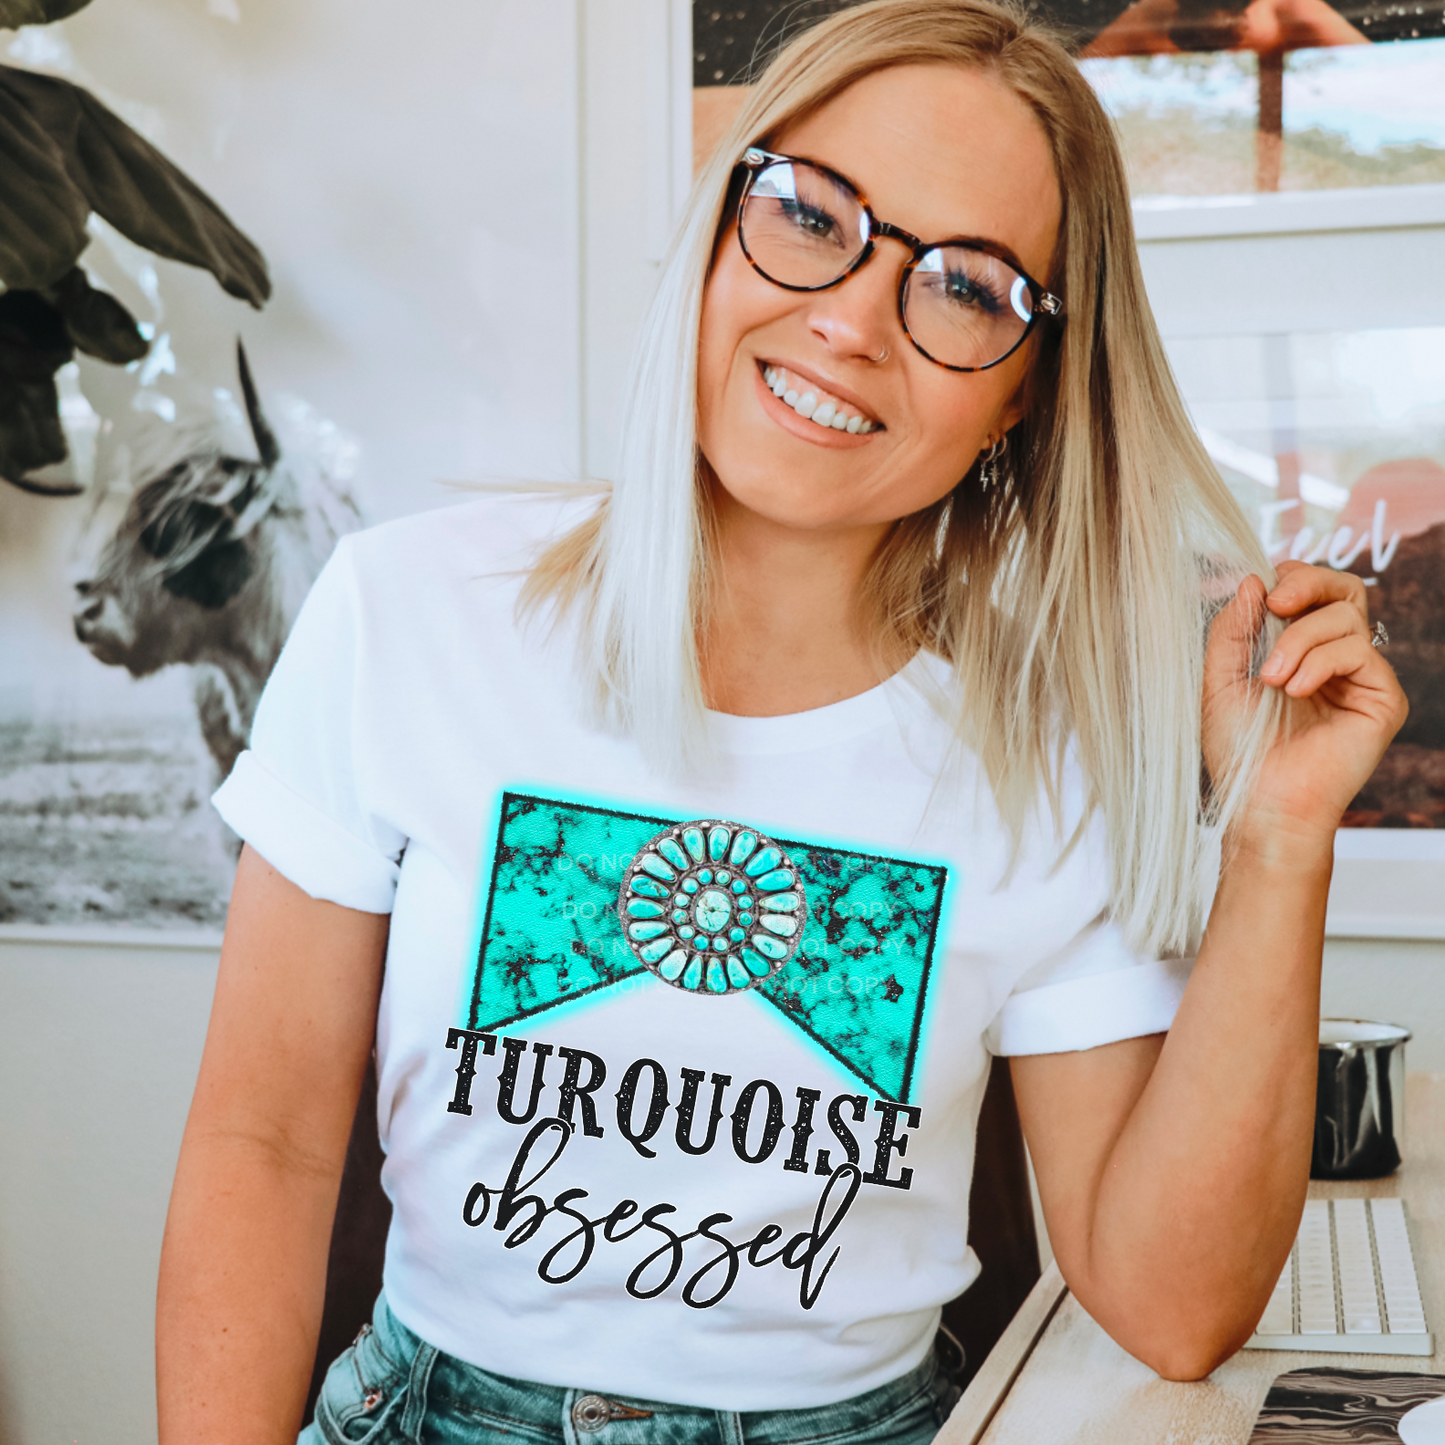 Turquoise Obsessed Sublimation Transfer